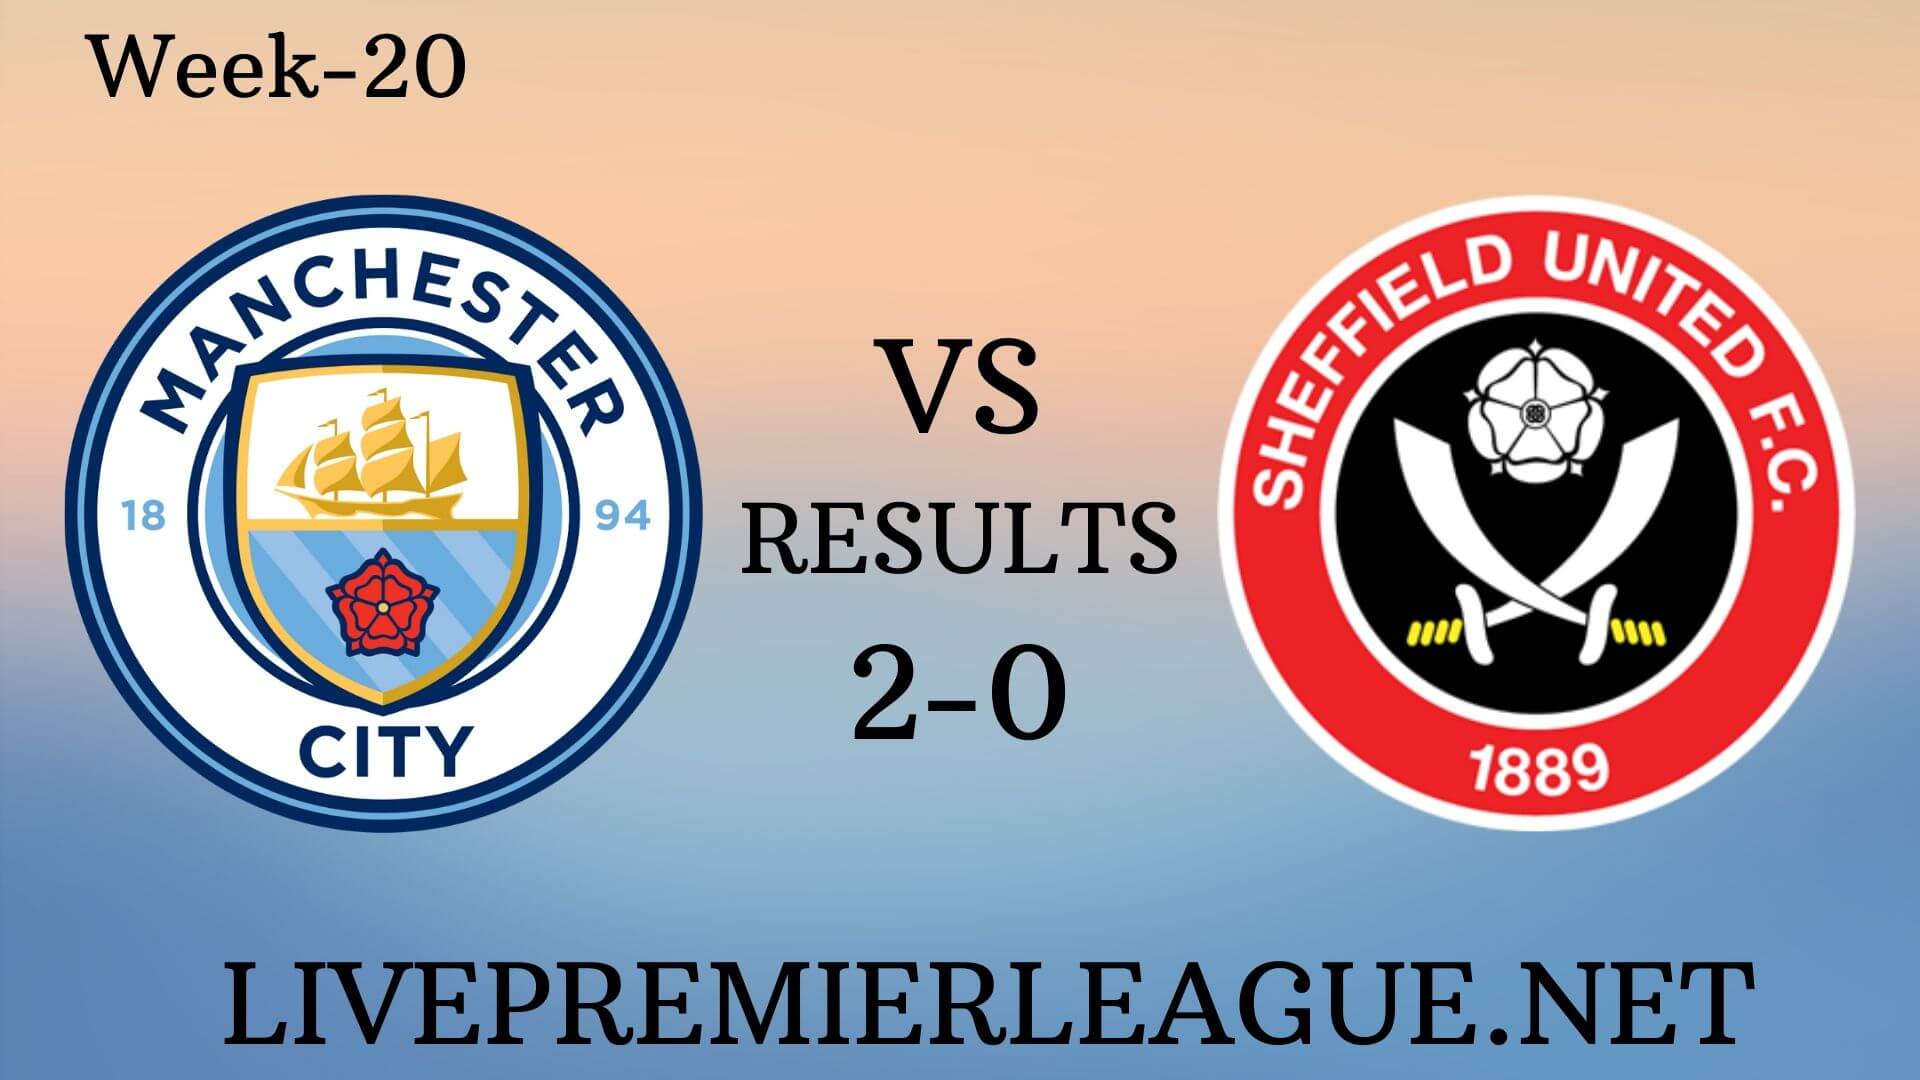 Manchester City Vs Sheffield United | Week 20 Results 2019